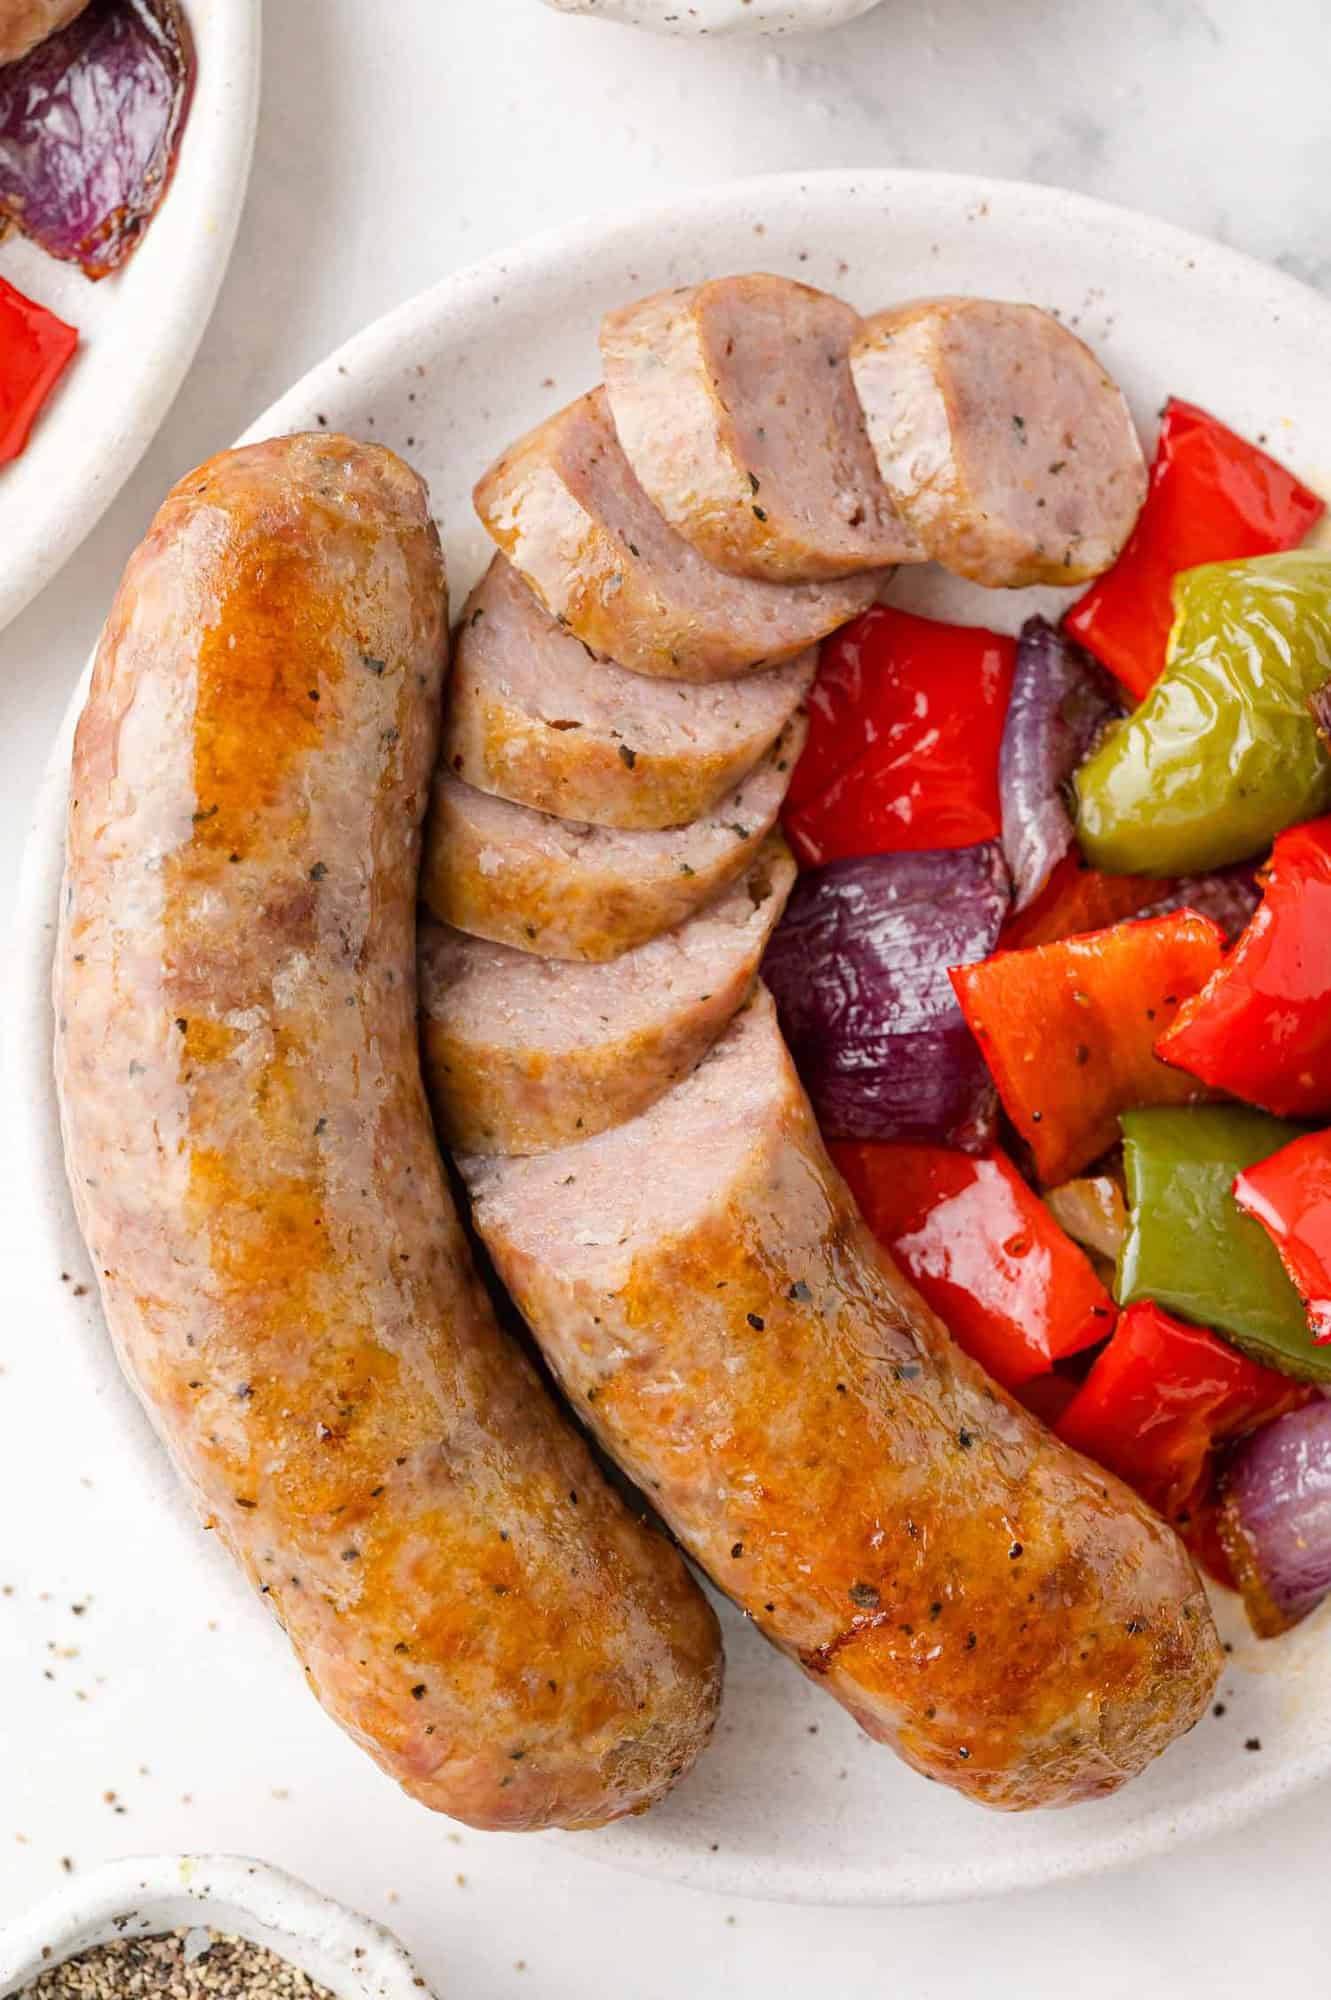 Baked Italian sausage with peppers and onions, on a plate, sausage partially sliced.